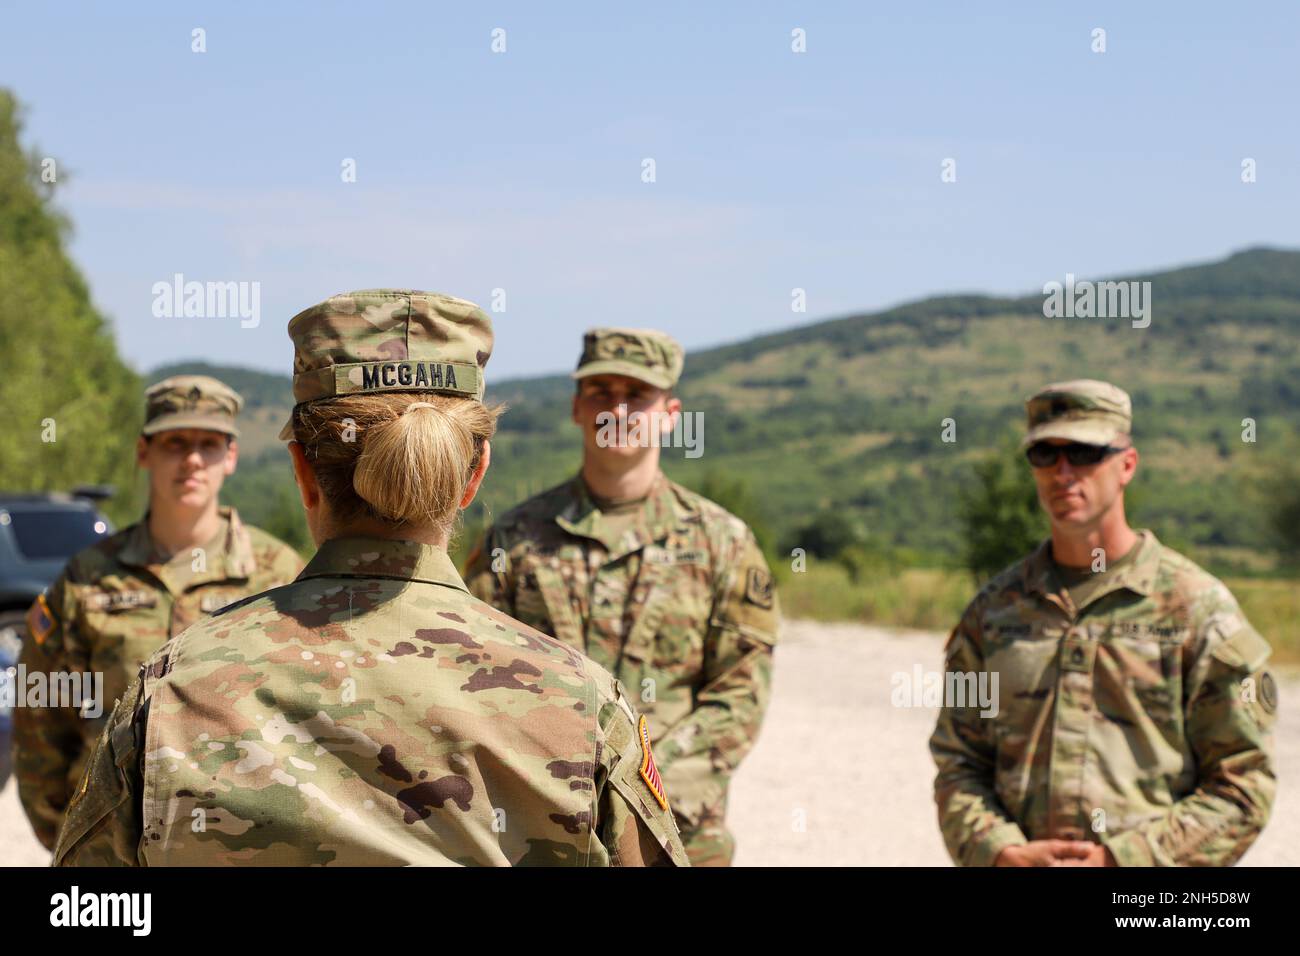 Brig. Gen. Pamela L. McGaha (center front), Commander of NATO HQ Sarajevo, visit guard members assigned to the State Medical Detachment and 1-169th Aviation Regiment, Maryland Army National Guard at Kasarna Manjaca, Dobrnja, Bosnia-Herzegovina on July 17, 2022. Guard members assigned to the State Medical Detachment and 1-169th Aviation Regiment, Maryland Army National Guard, trained alongside active duty Soldiers from the 1st Squadron, 91st Cavalry Regiment, 173rd Airborne Brigade, 12th Combat Aviation Brigade, and the Armed Forces of Bosnia and Herzegovina soldiers in tactics, aviation, medic Stock Photo